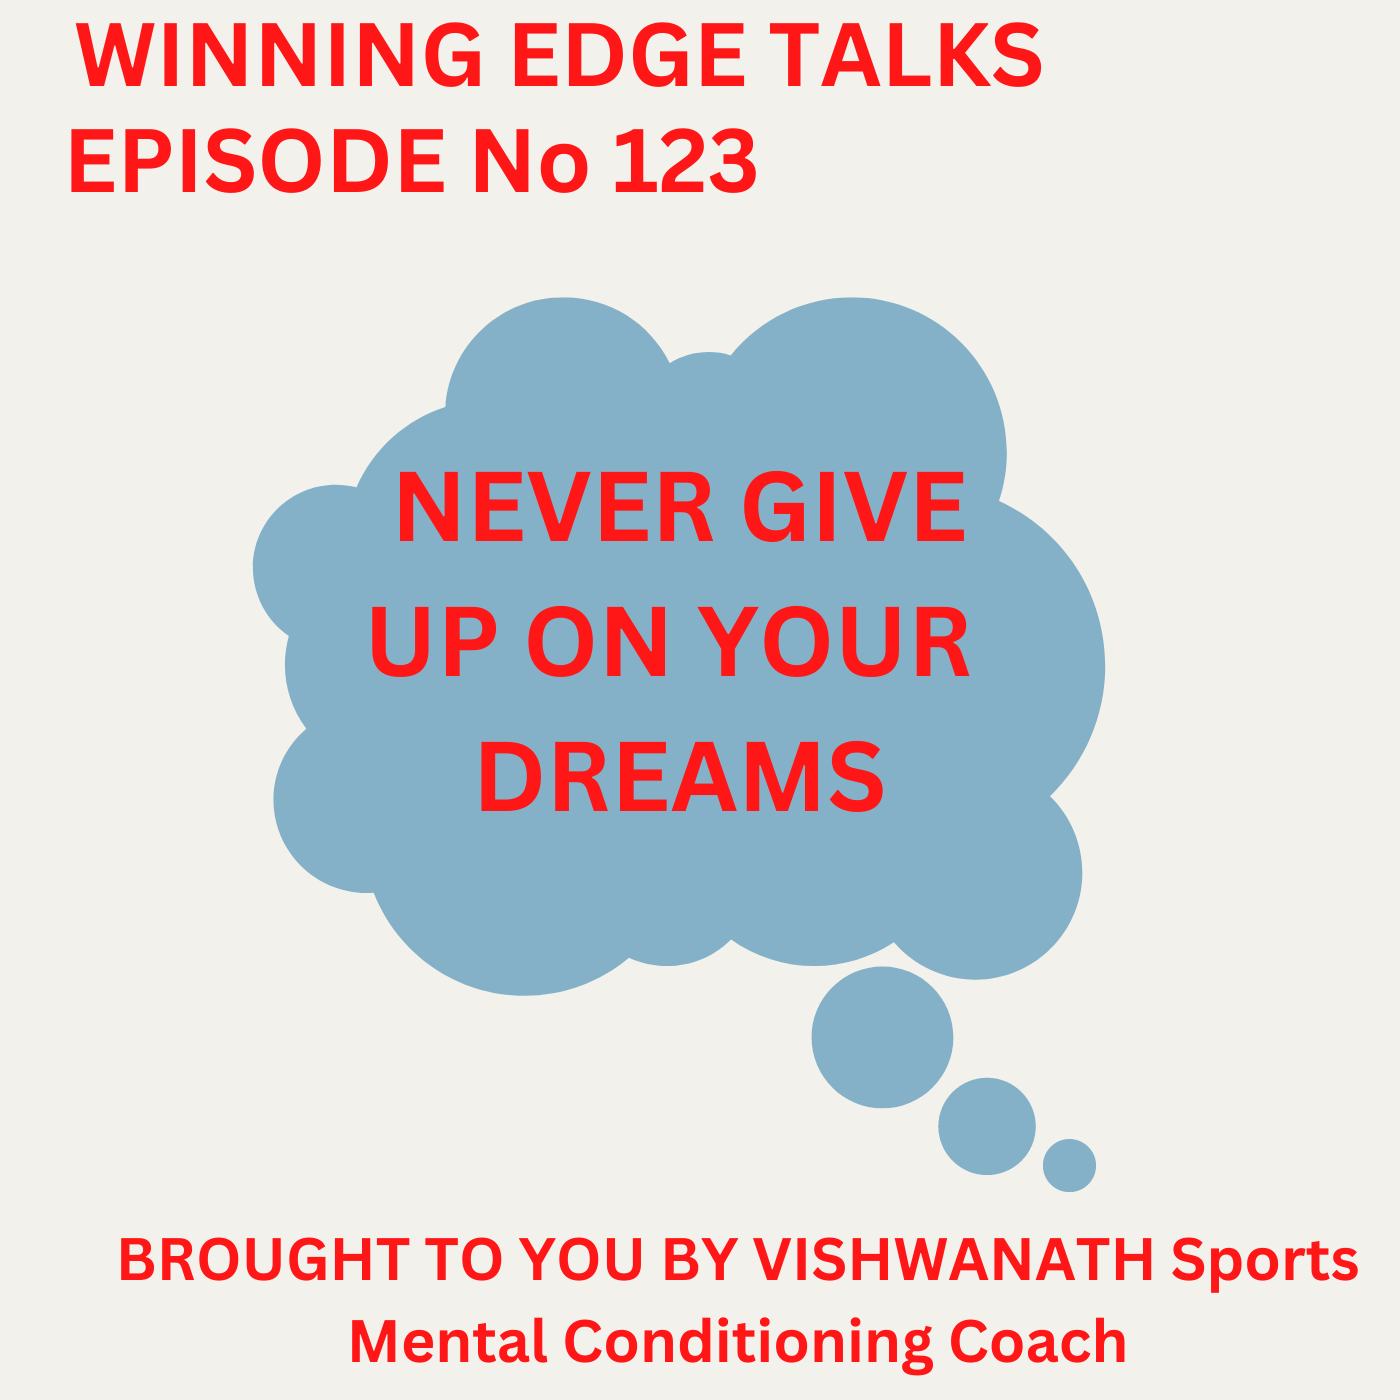 Episode 123 NEVER GIVE UP ON YOUR DREAMS